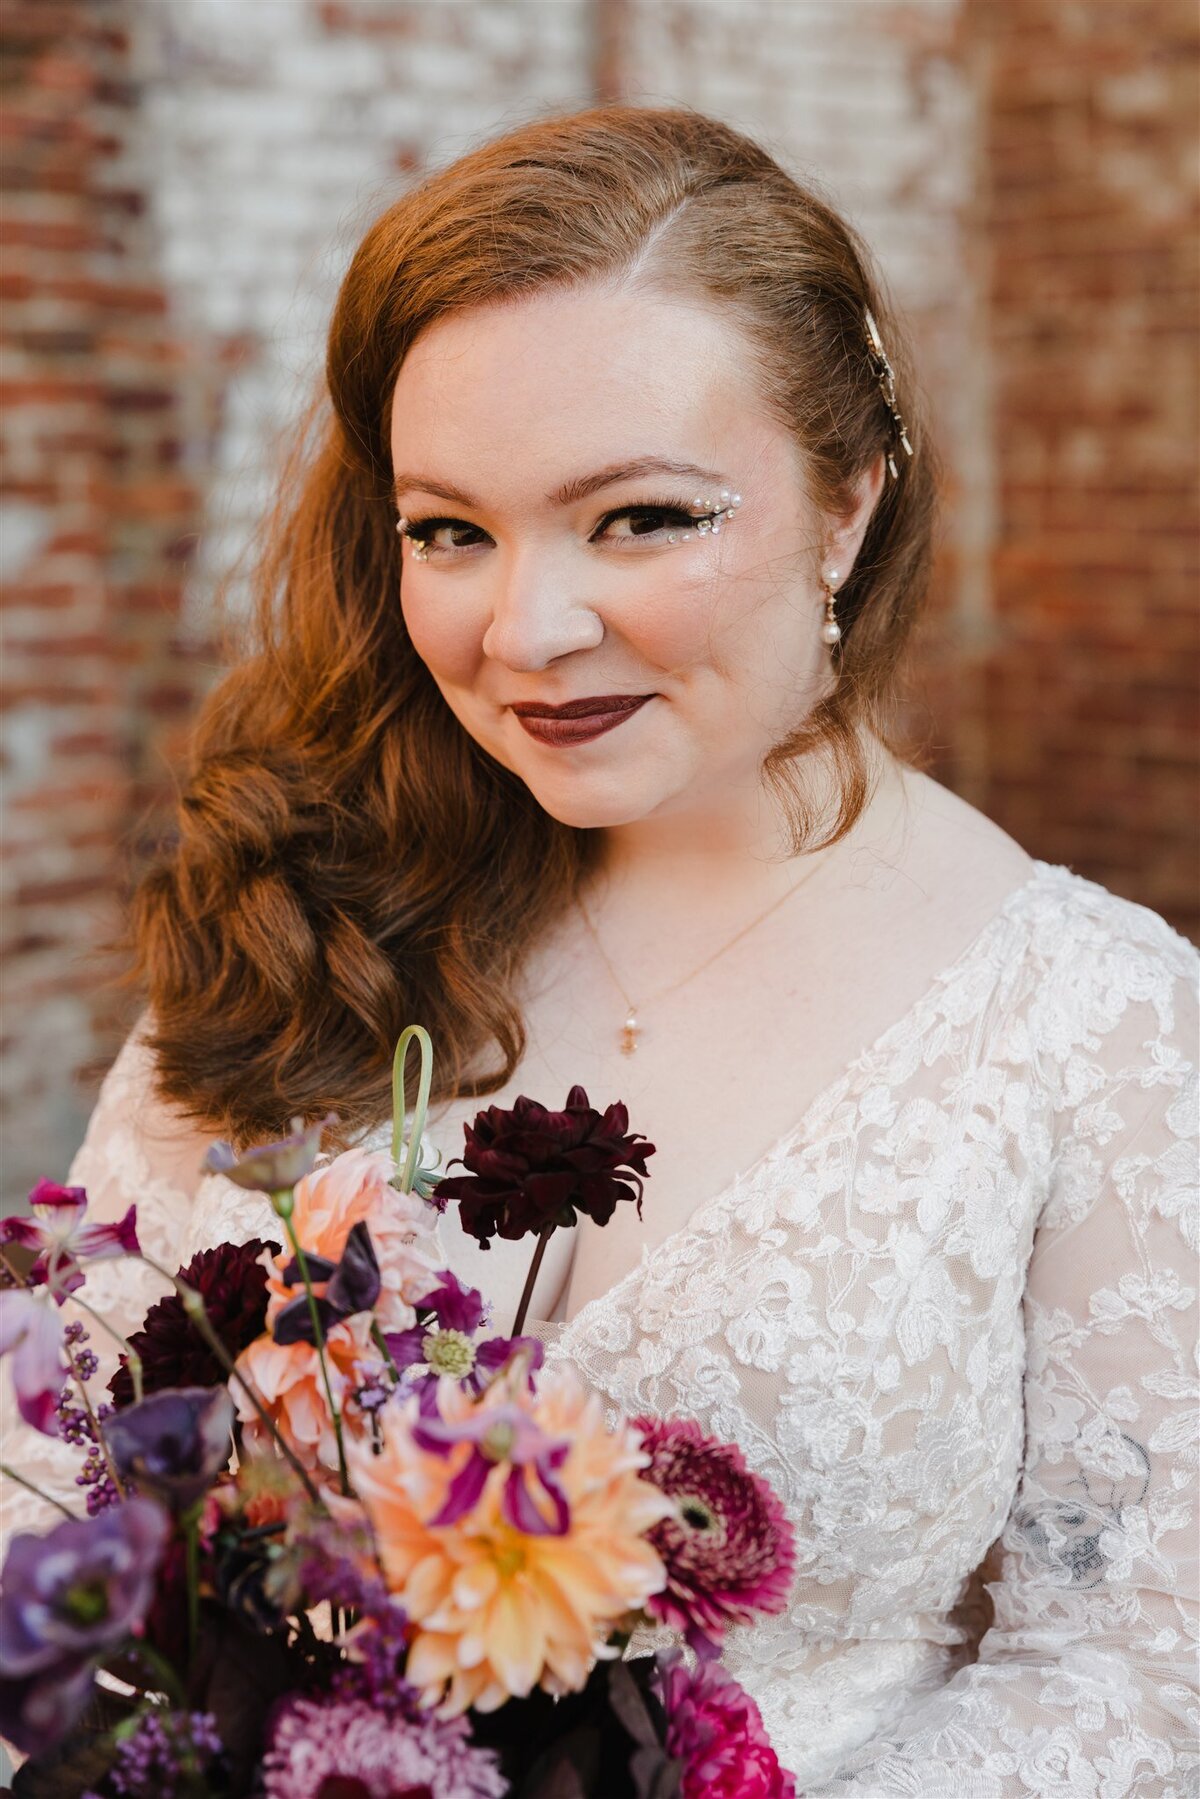 Wedding day makeup and bridal portrait